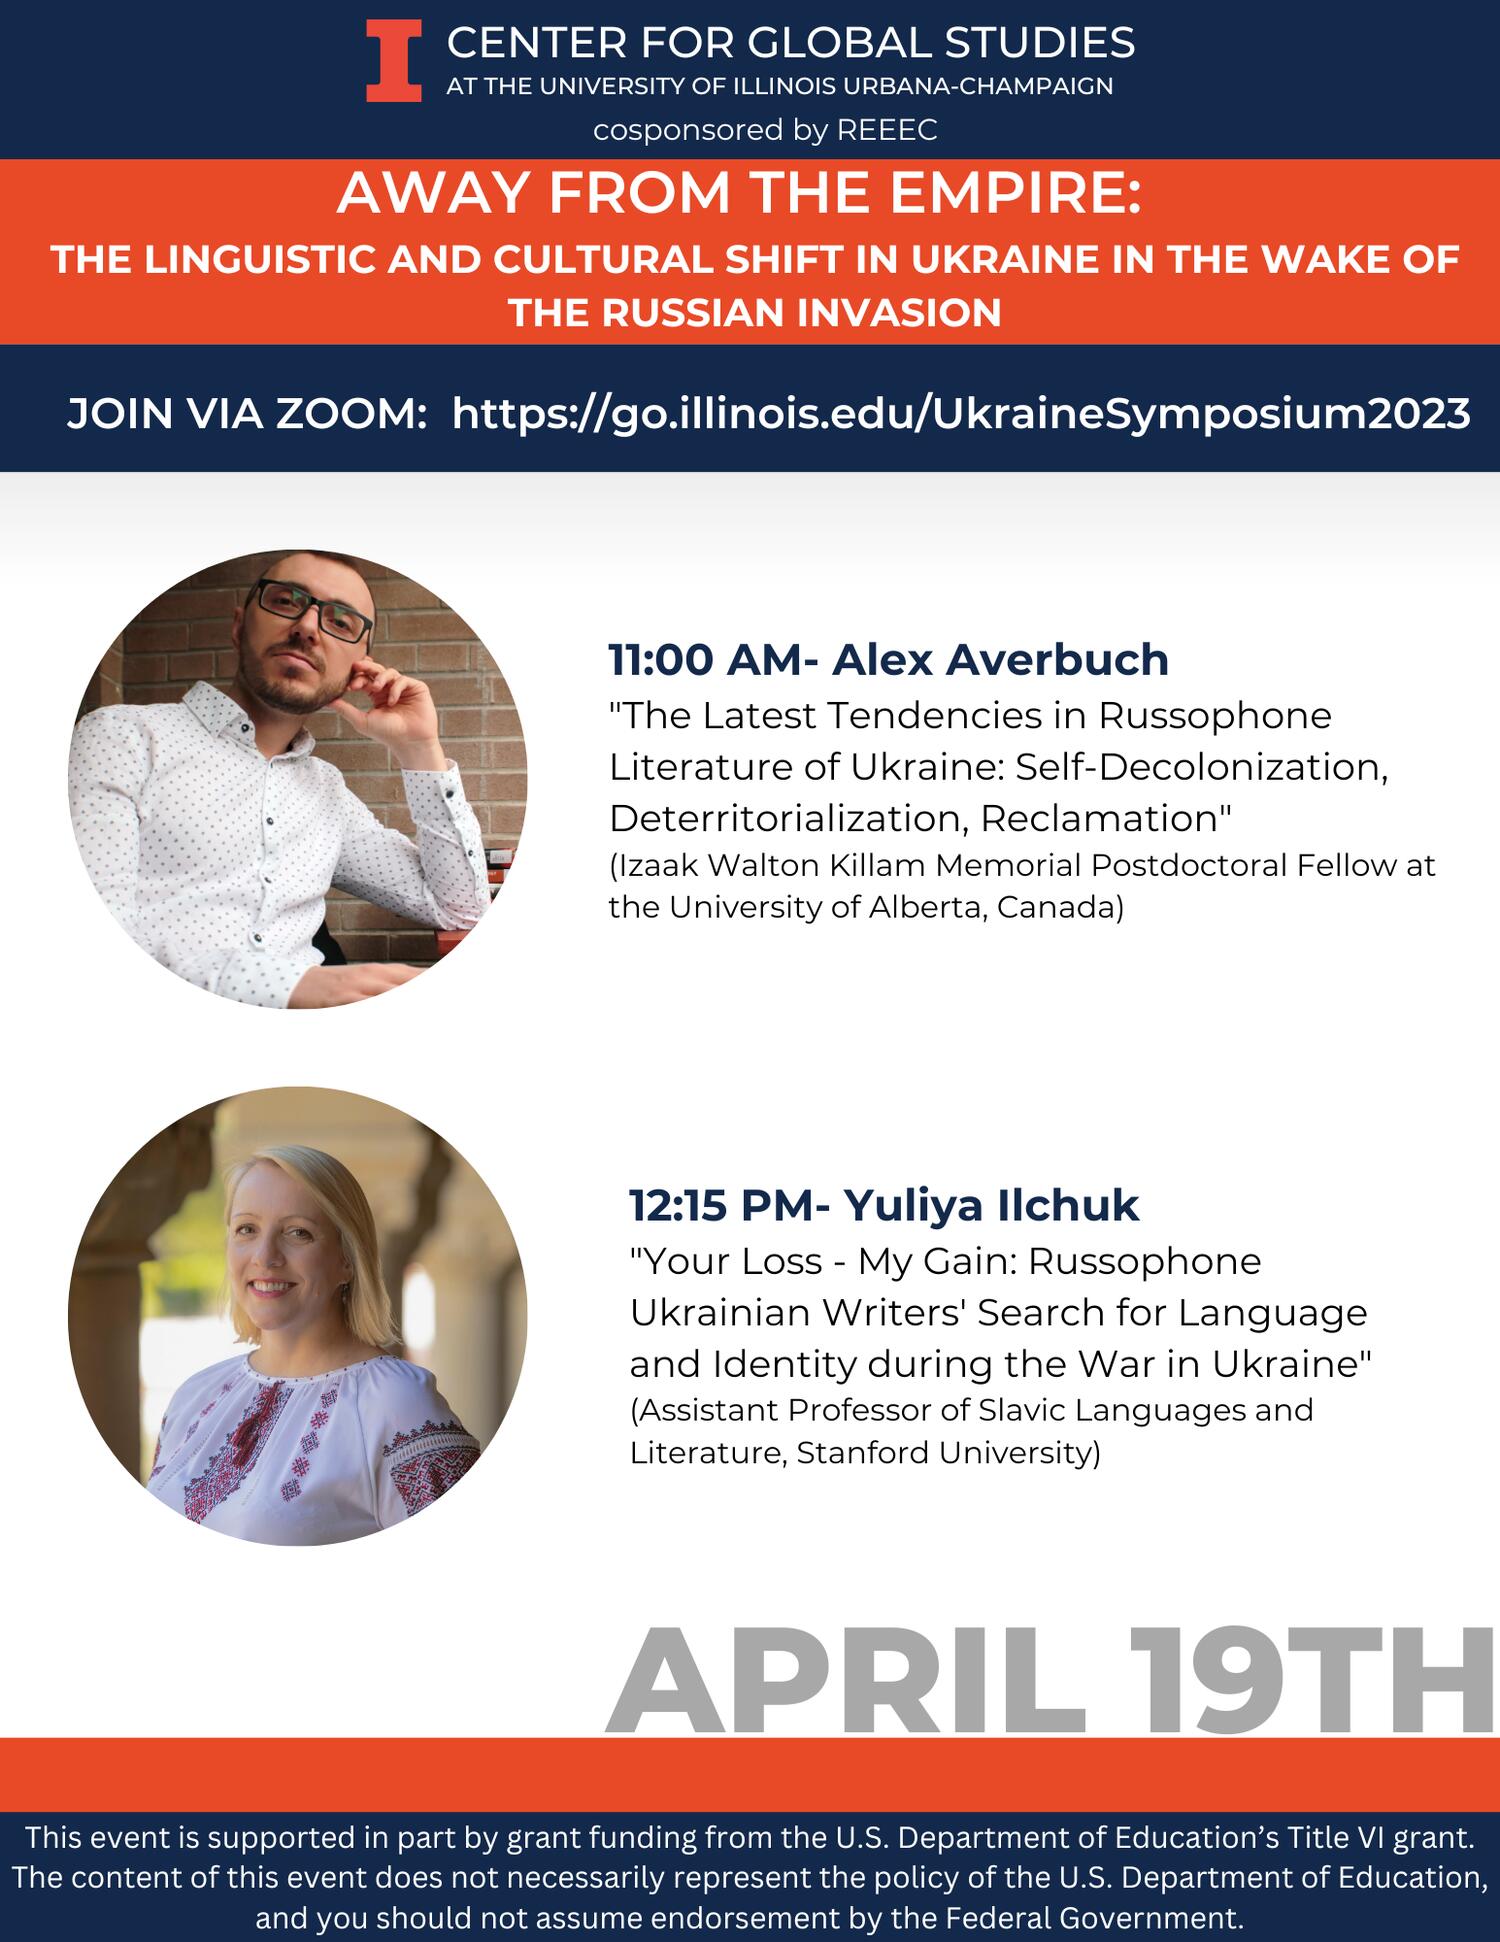 April 19 at 11:00 AM, "The Latest Tendencies in Russophone Literature of Ukraine: Self-Decolonization, Deterritorialization, Reclamation”, Presented by Alex Averbuch. At 12:15 PM, "Your Loss - My Gain: Russophone Ukrainian Writers' Search for Language and Identity during the War in Ukraine” is presented by Yuliya Ilchuck. 